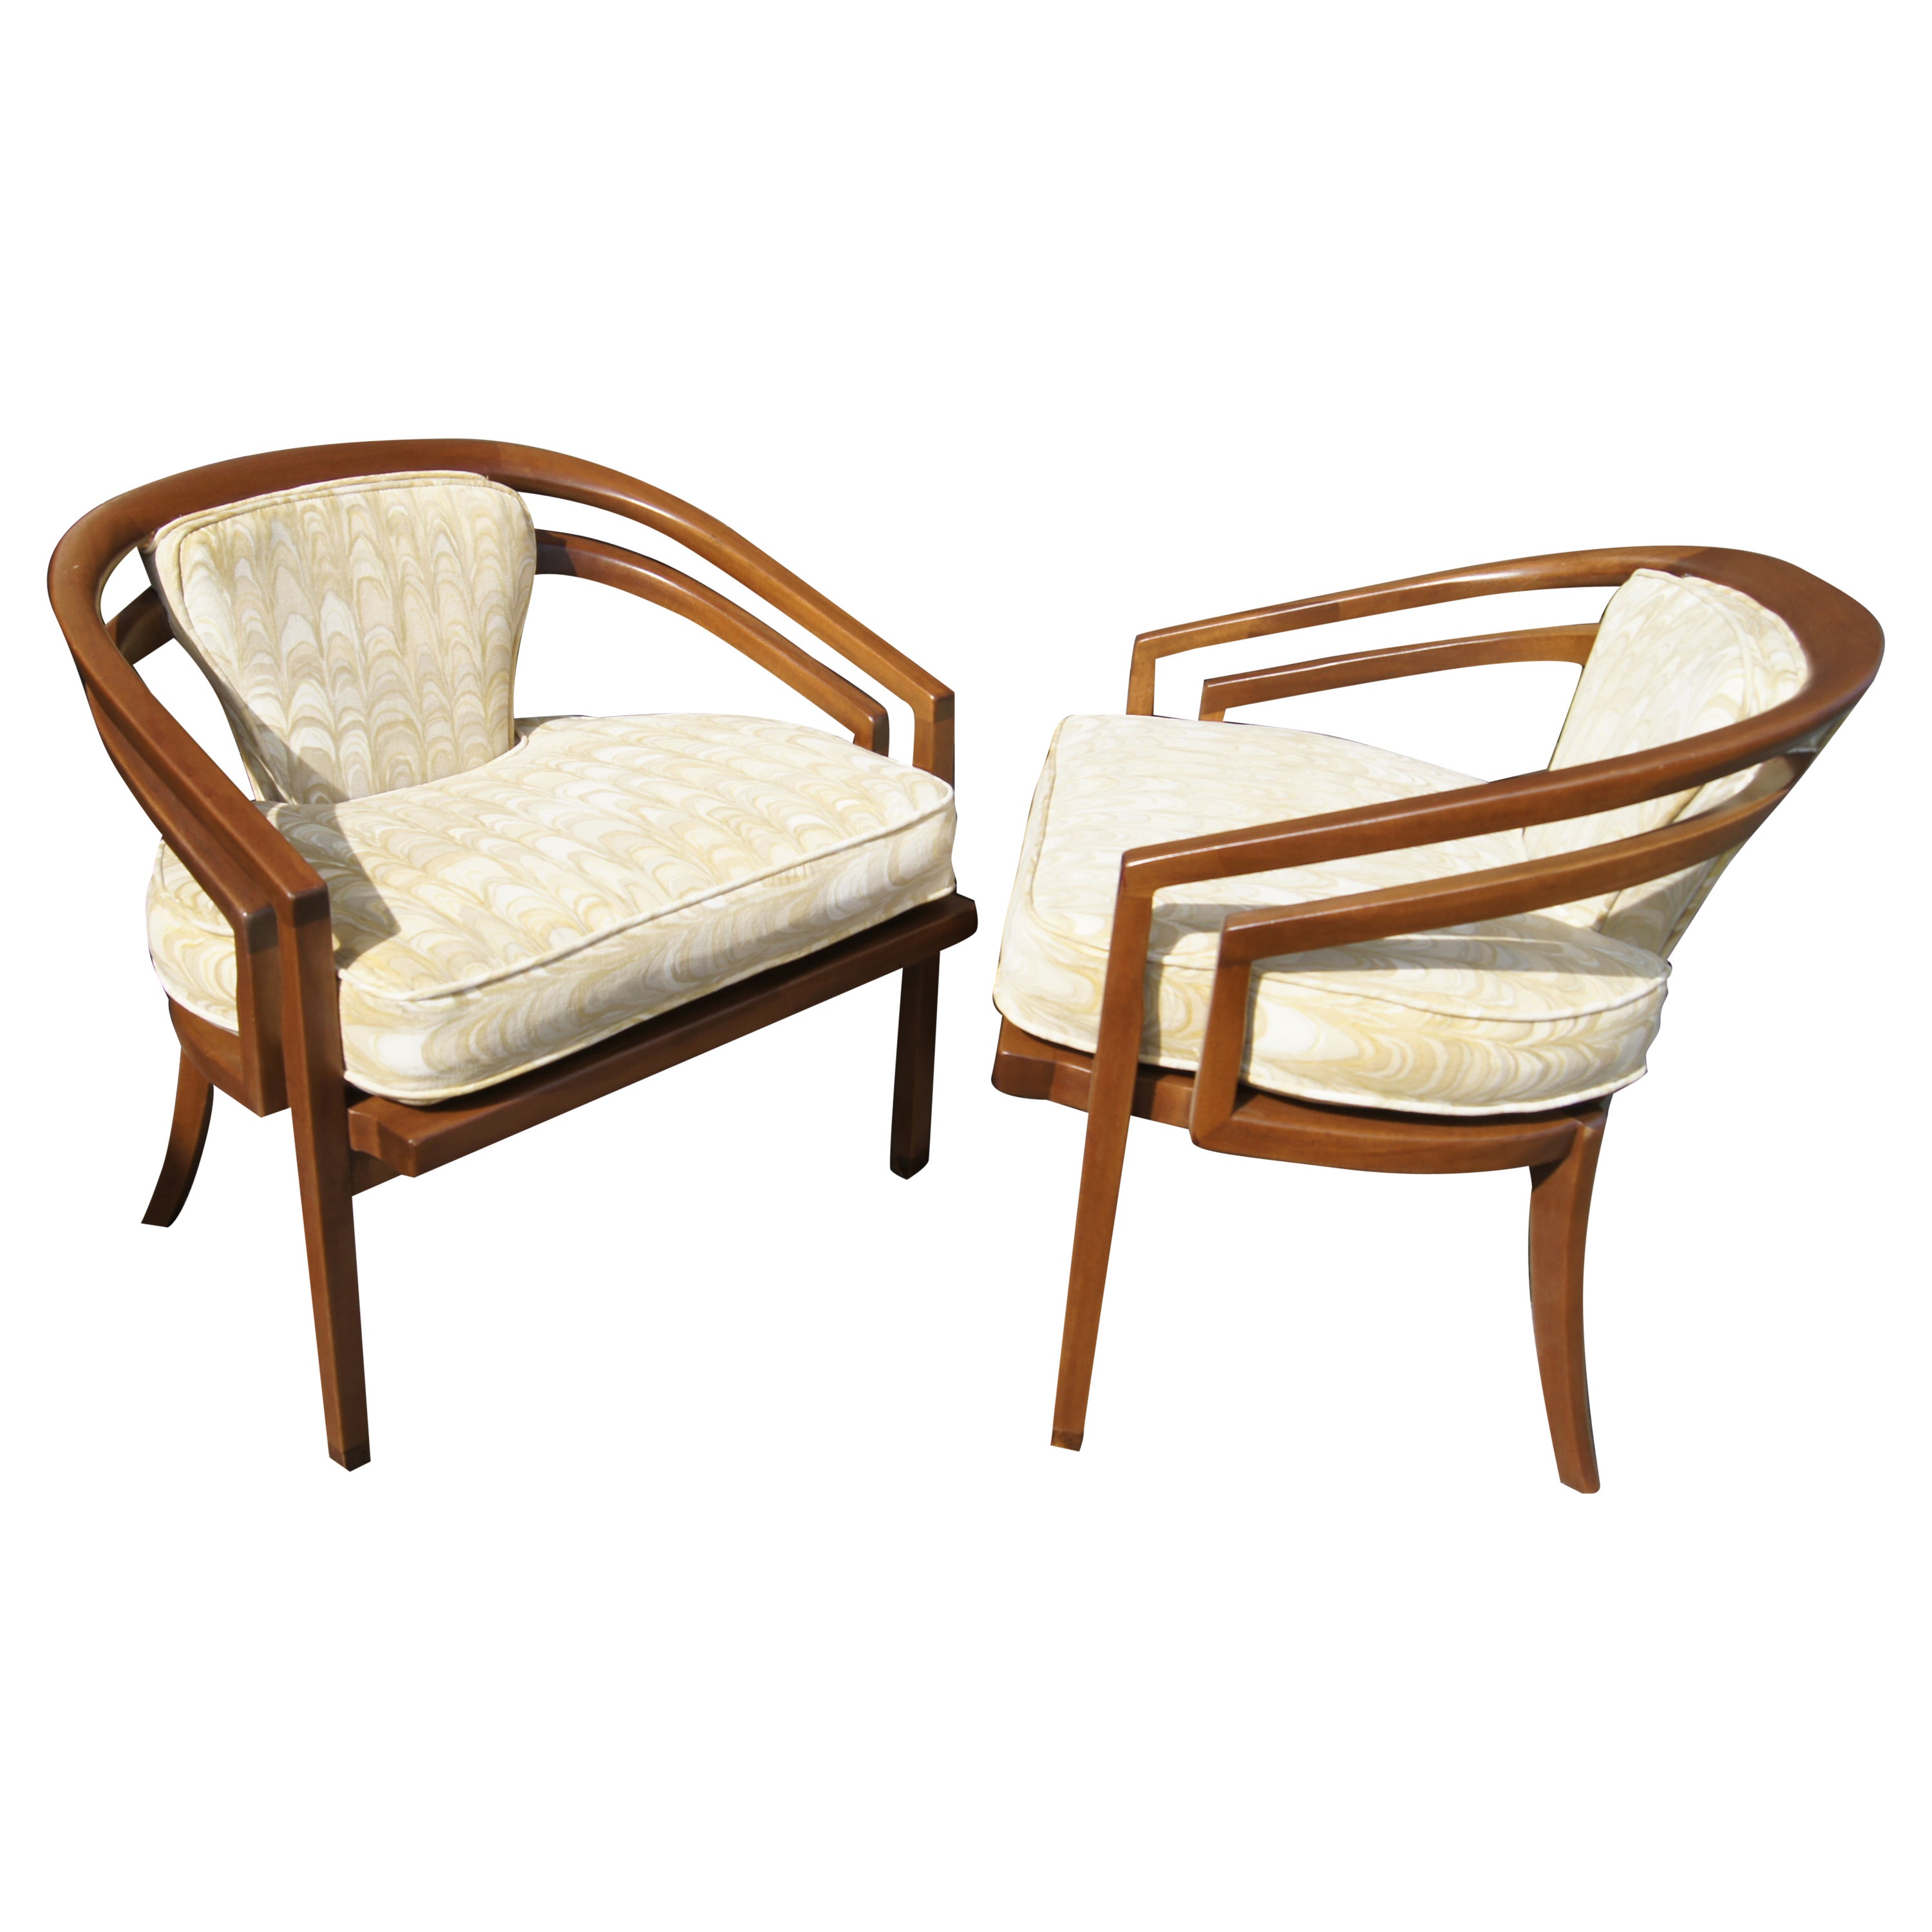 Pair of Wide Mahogany Armchairs by Baker with Jack Lenor Larsen Textile For Sale